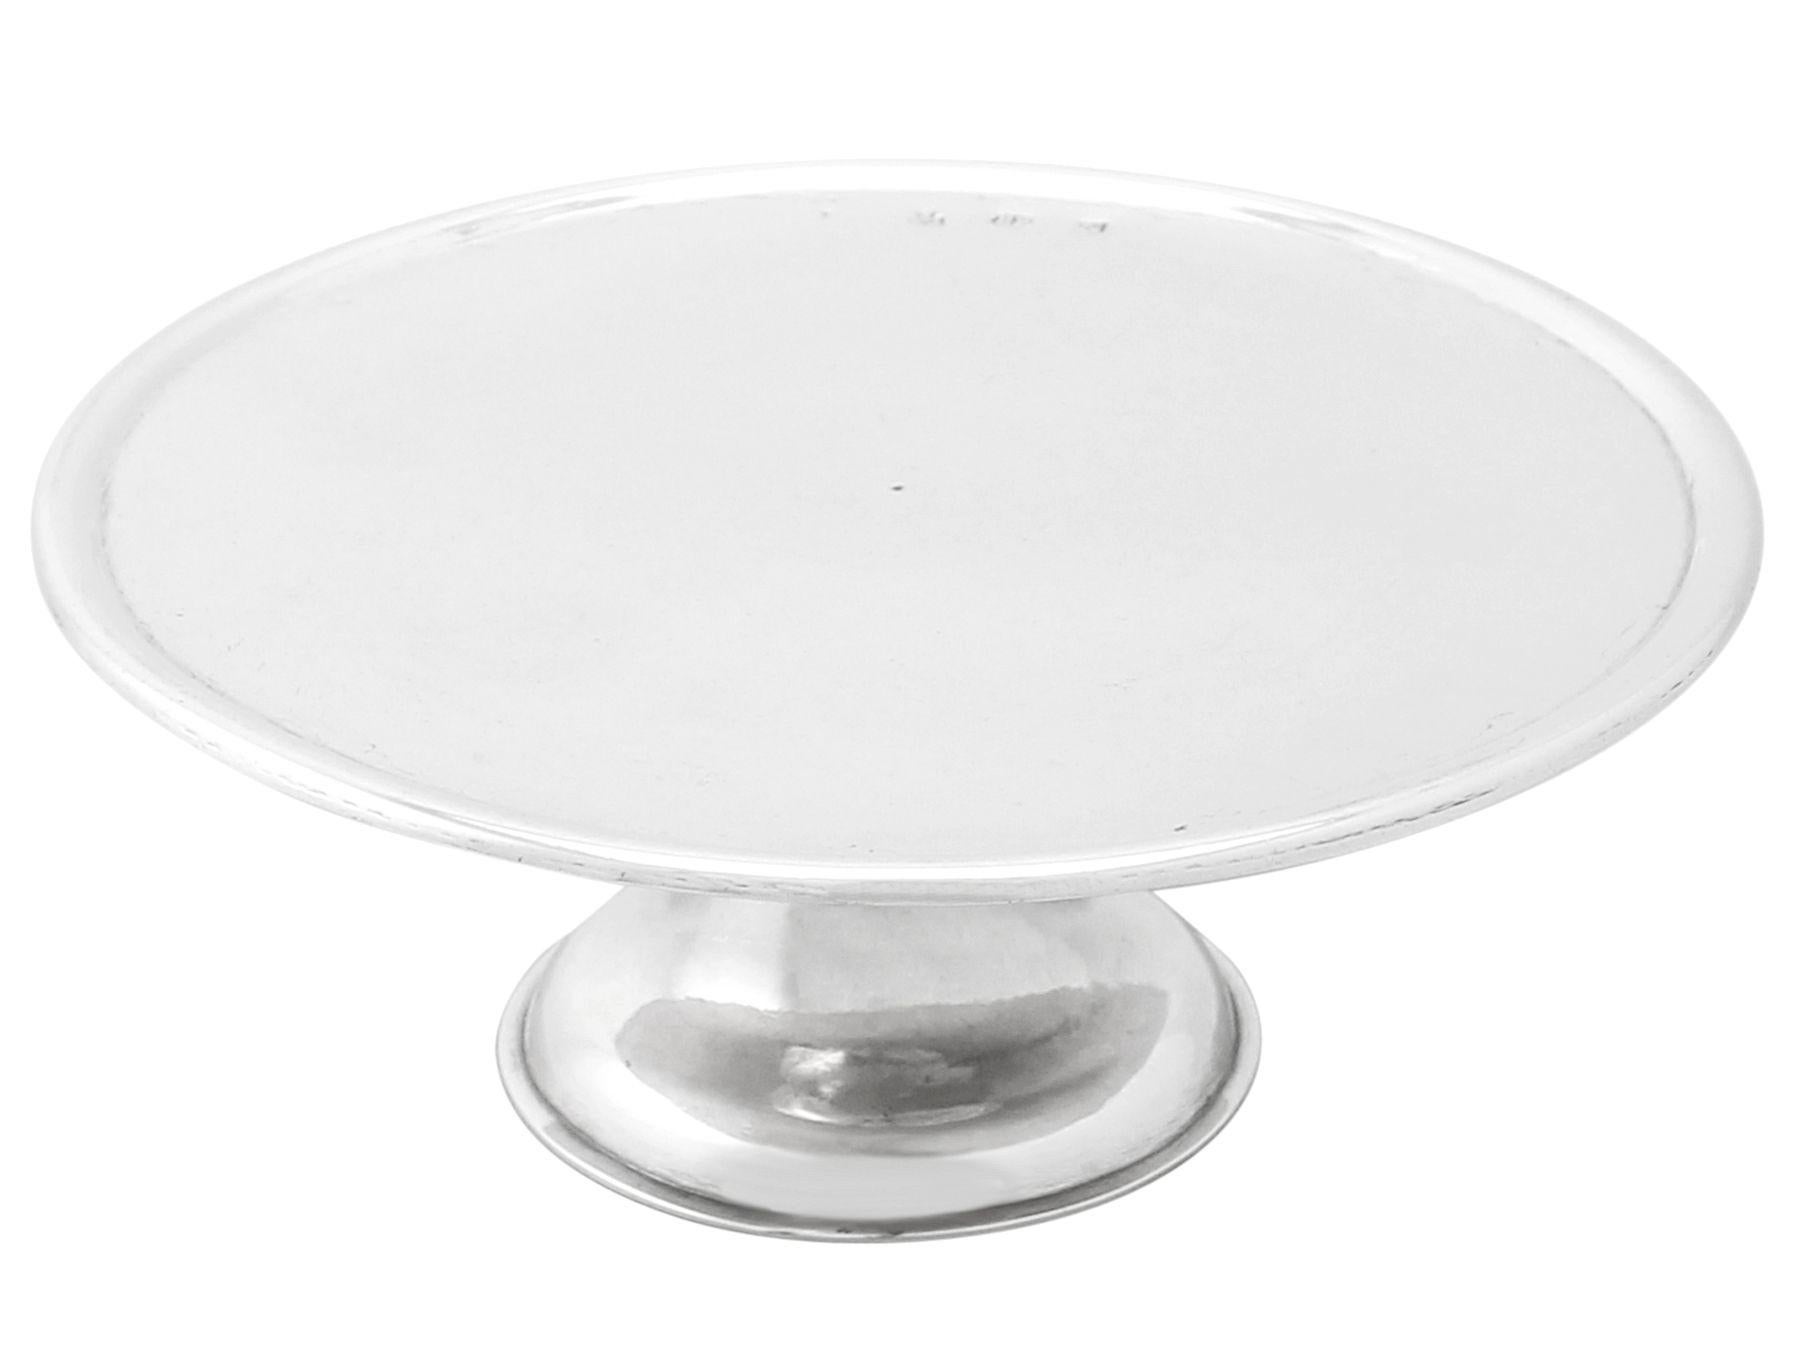 An exceptional, fine and impressive, rare antique George I Scottish sterling silver tazza; part of our Georgian silverware collection.

This exceptional antique George I Scottish sterling silver tazza has a plain circular form onto a cylindrical